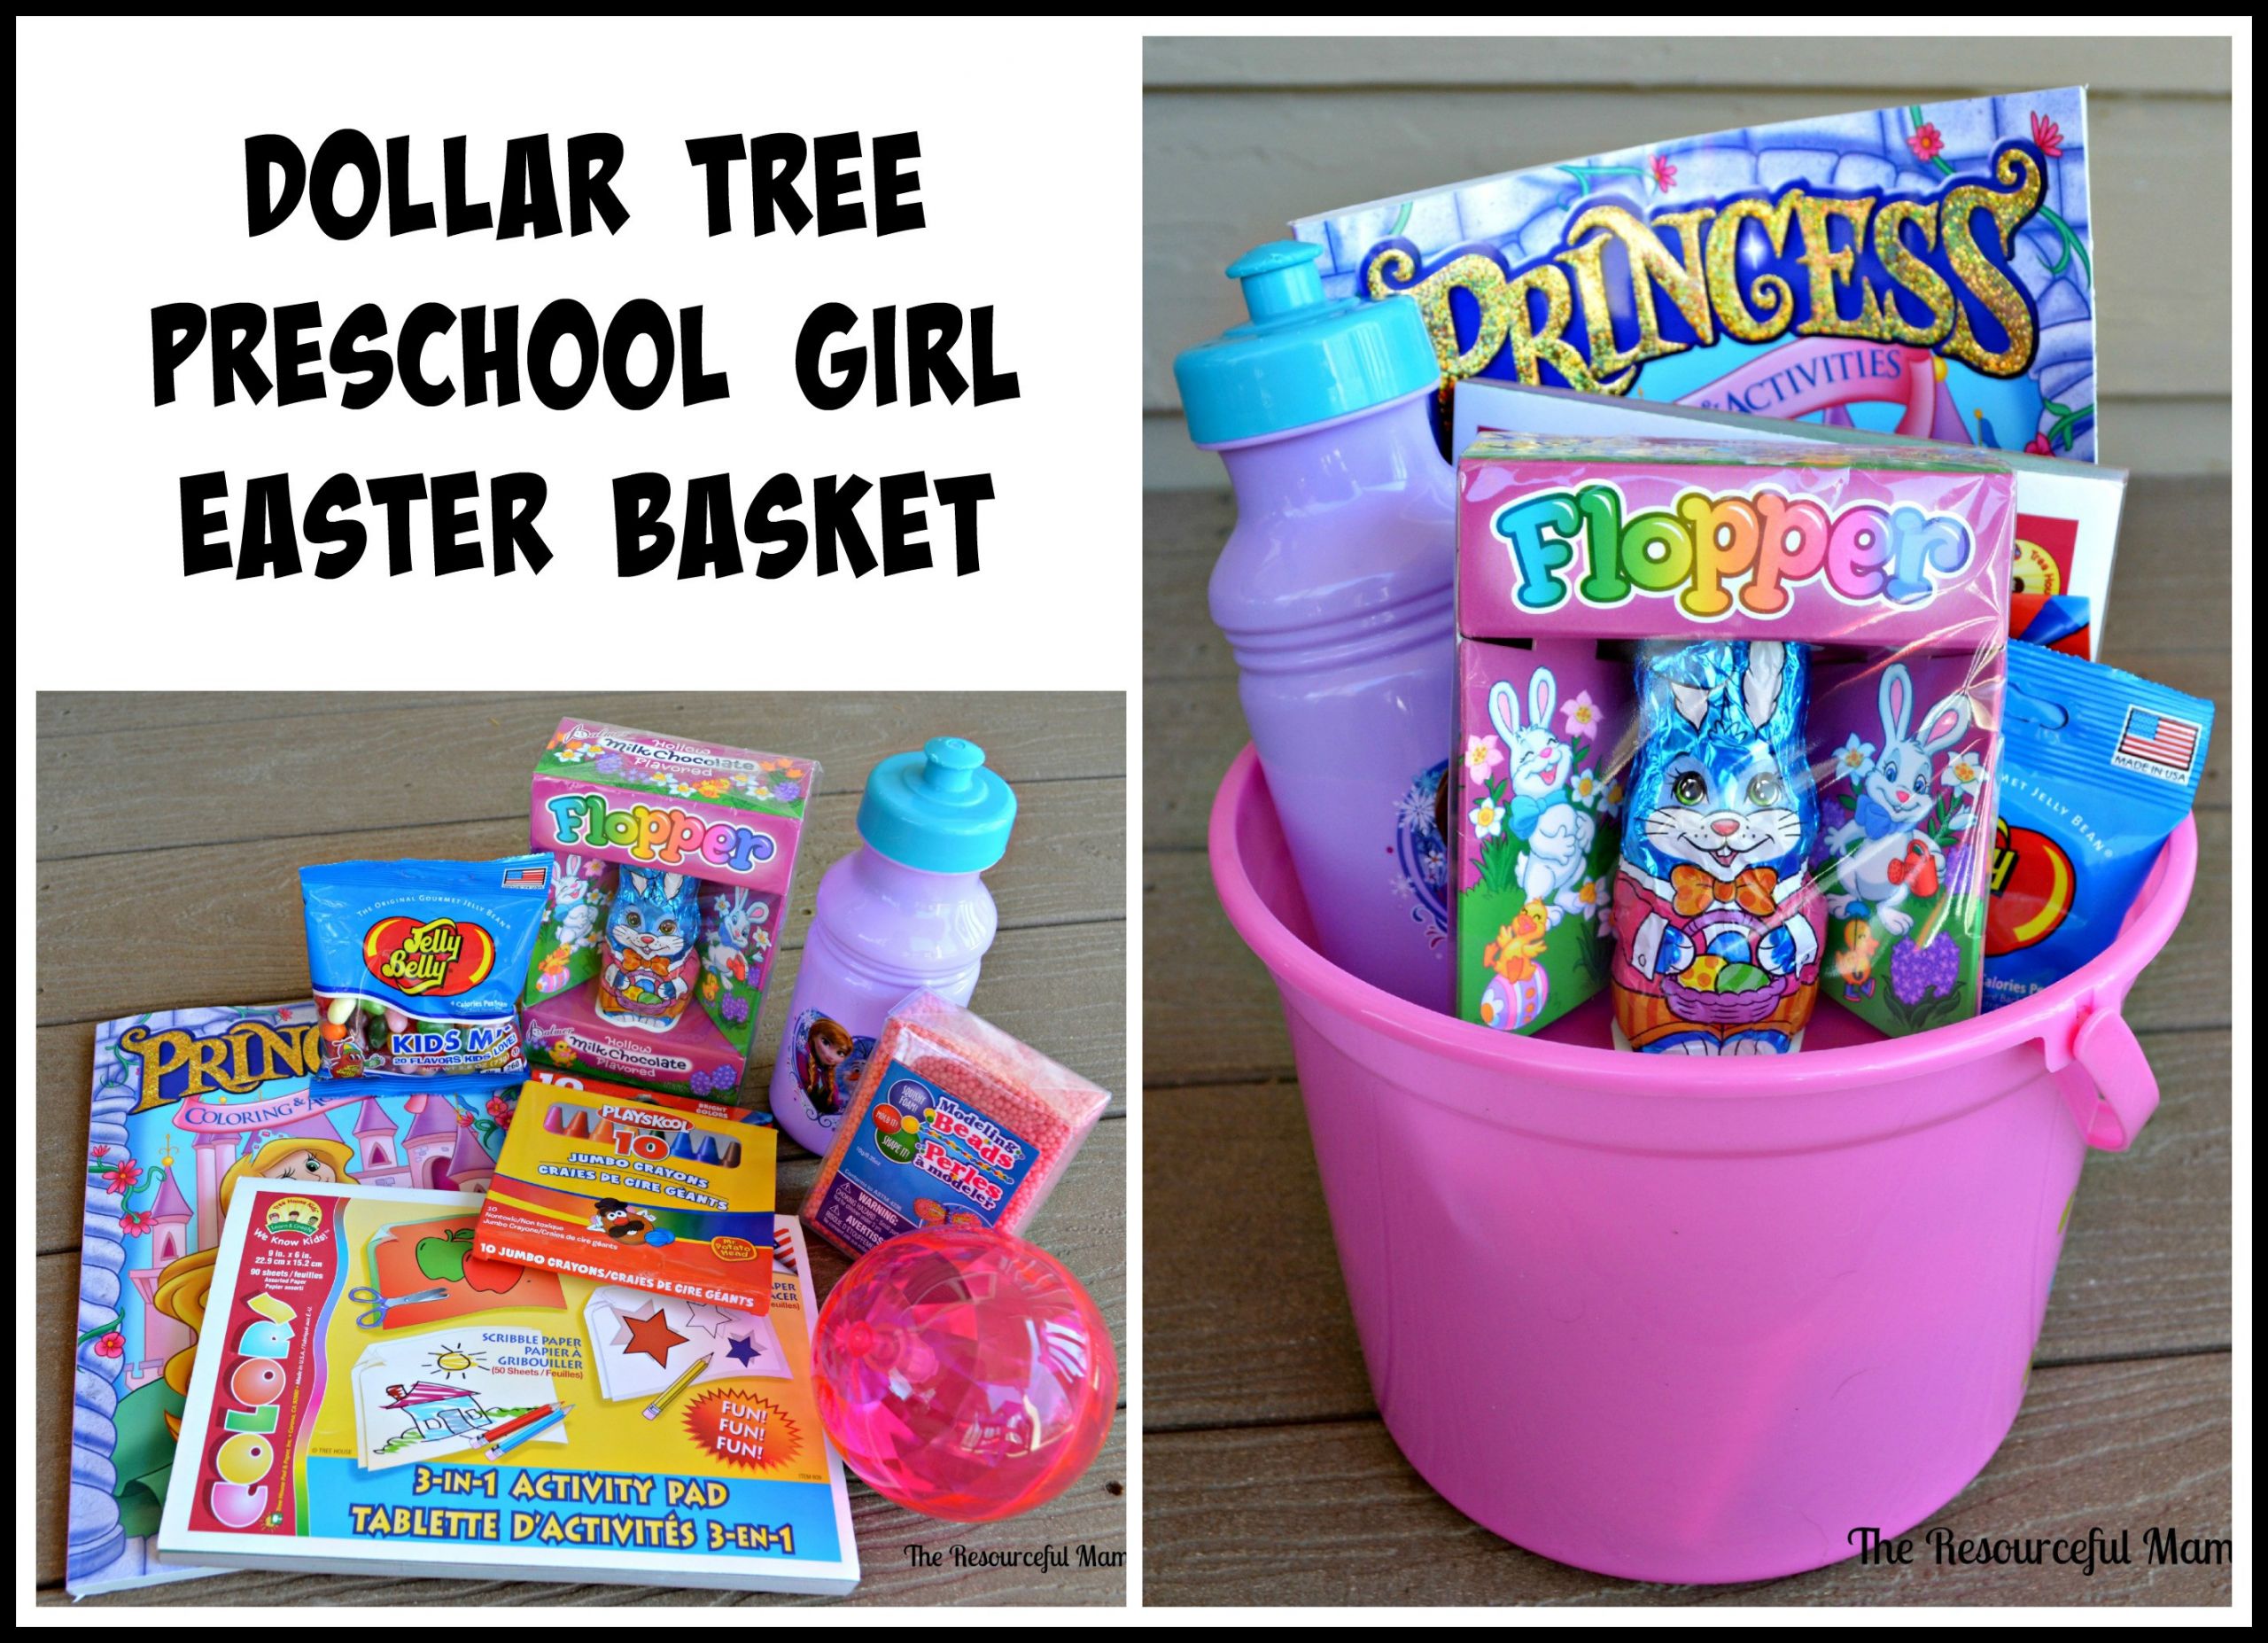 Easter Basket Ideas For Girlfriend
 Dollar Tree Easter Baskets The Resourceful Mama